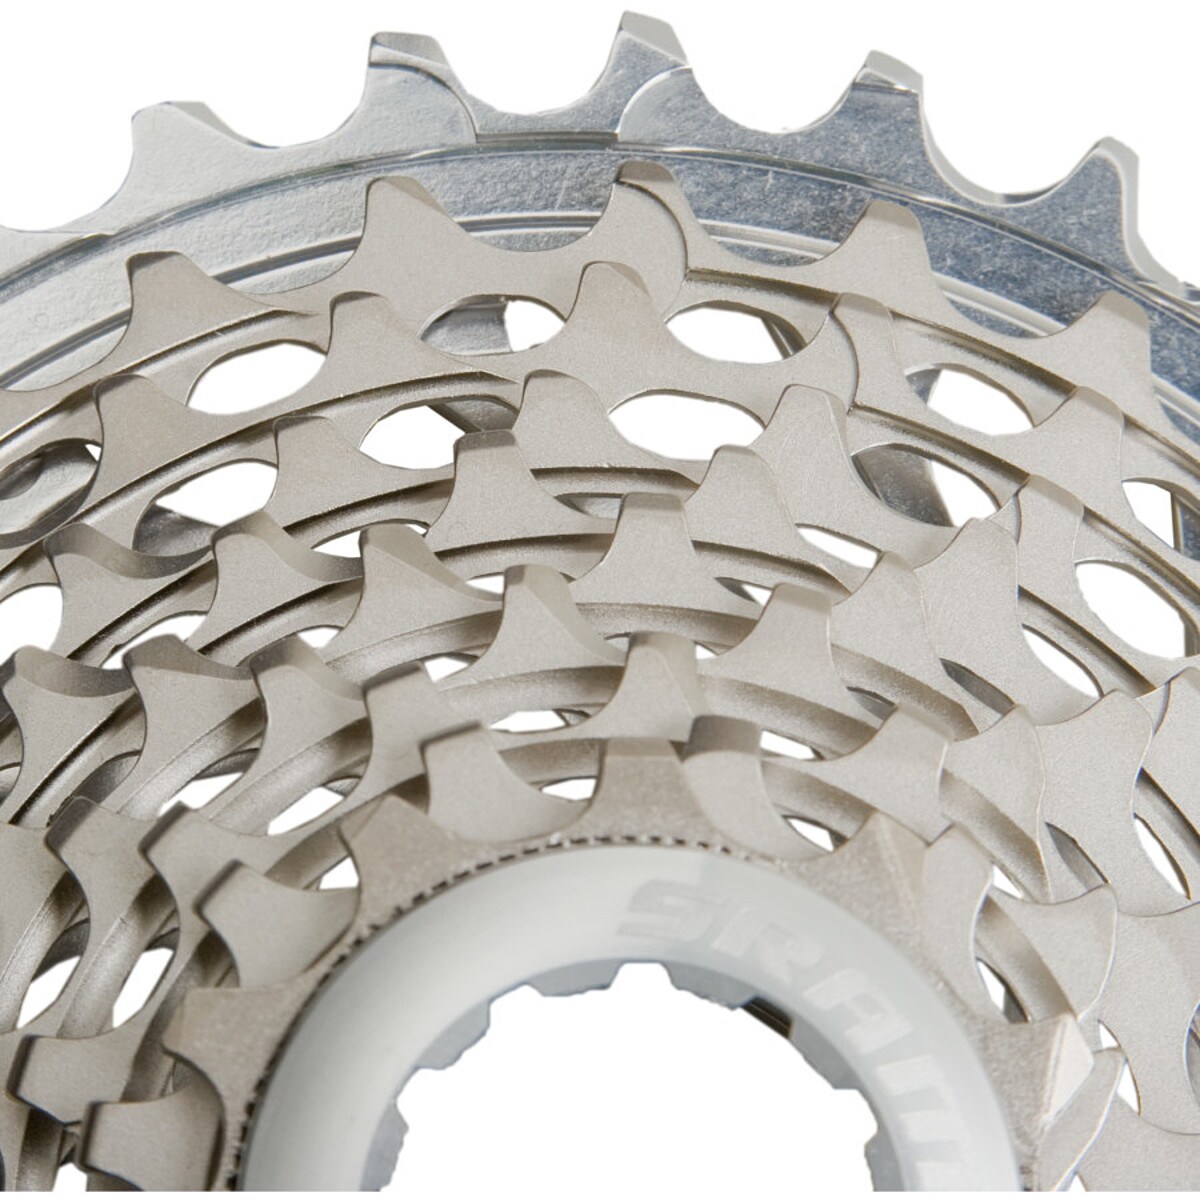 SRAM XX XG-1099 10-Speed Road Bicycle Cassette (11-36) by SRAM